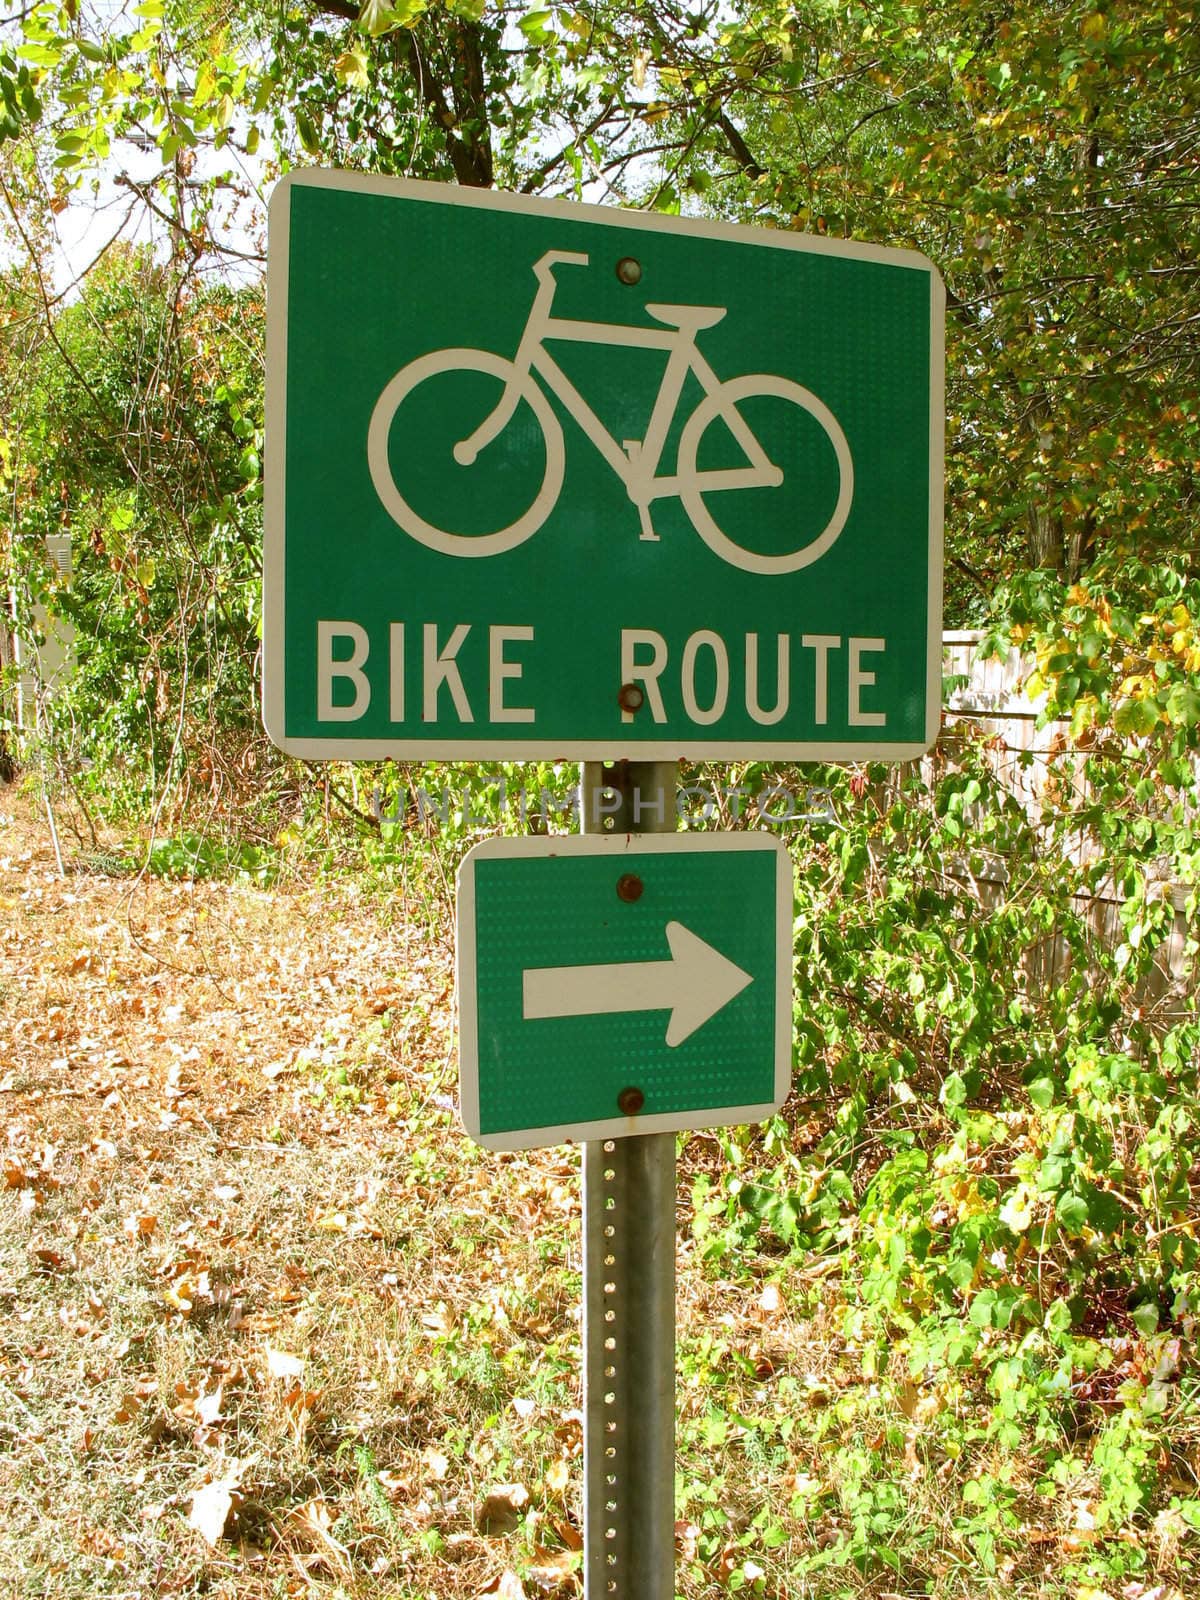 A green bike route sign on the side of the road.